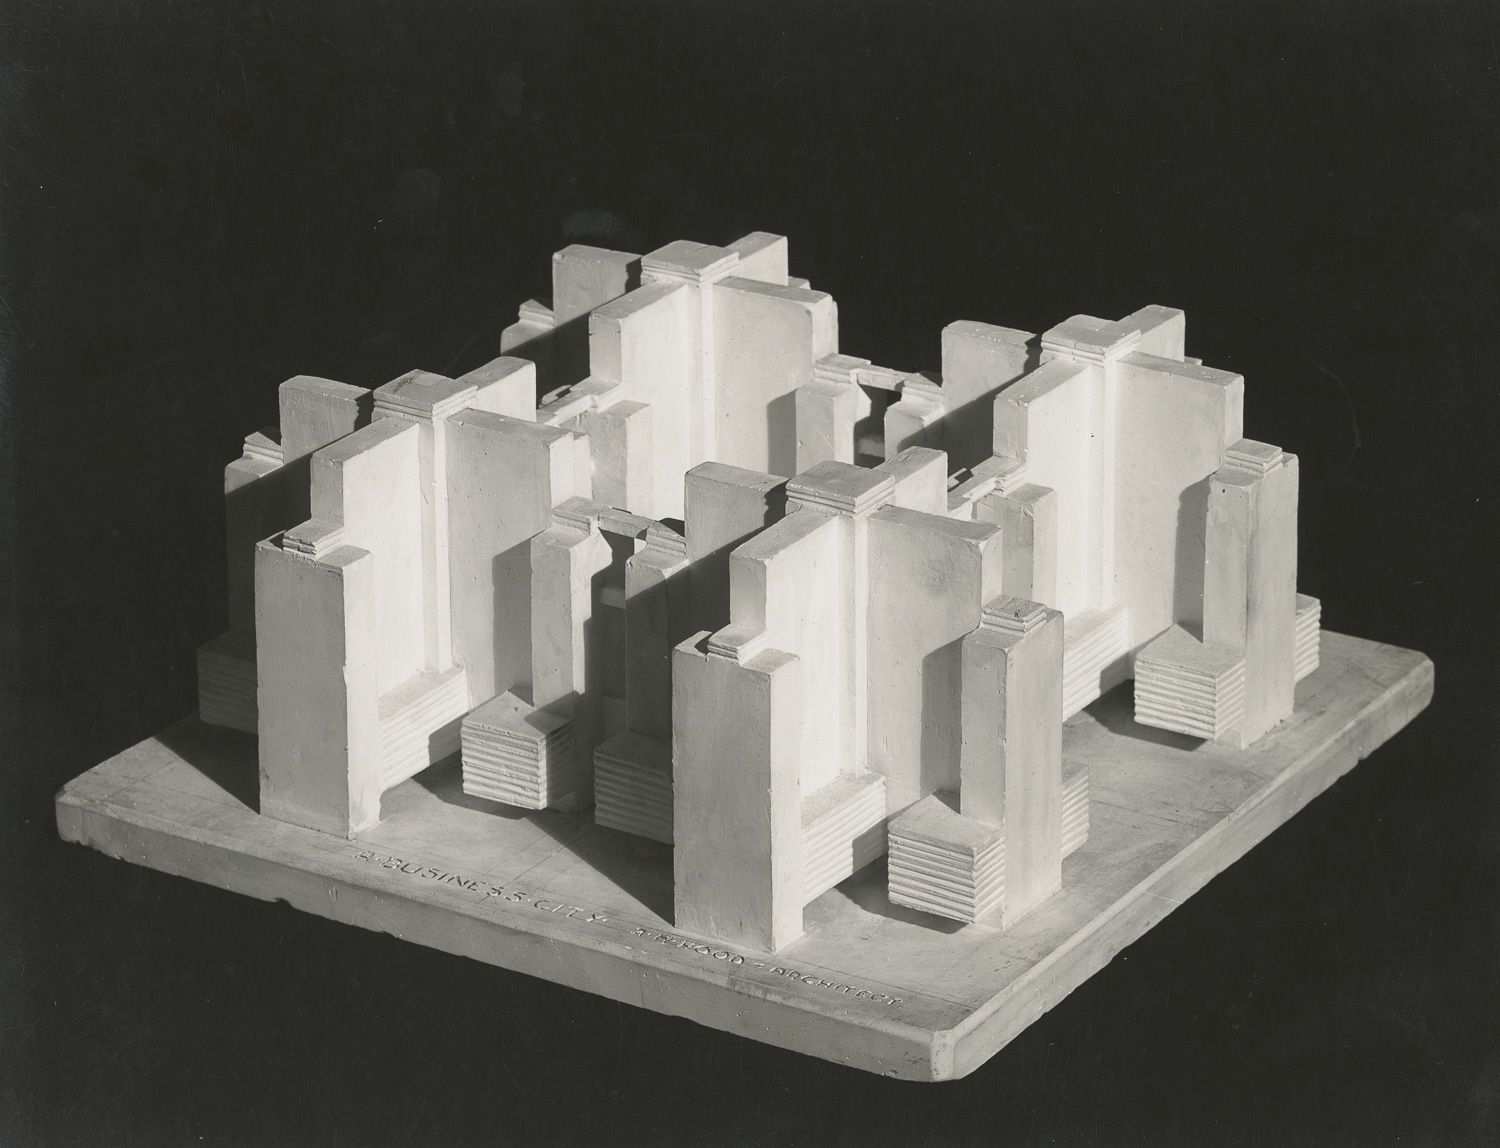 A black and white photograph taken from an angle above an architectural model on a square base. The model consists of four identical towers arranged in a two-by-two grid. Each tower has a cruciform (cross-shaped) plan, with four equal wings radiating out from a central core.